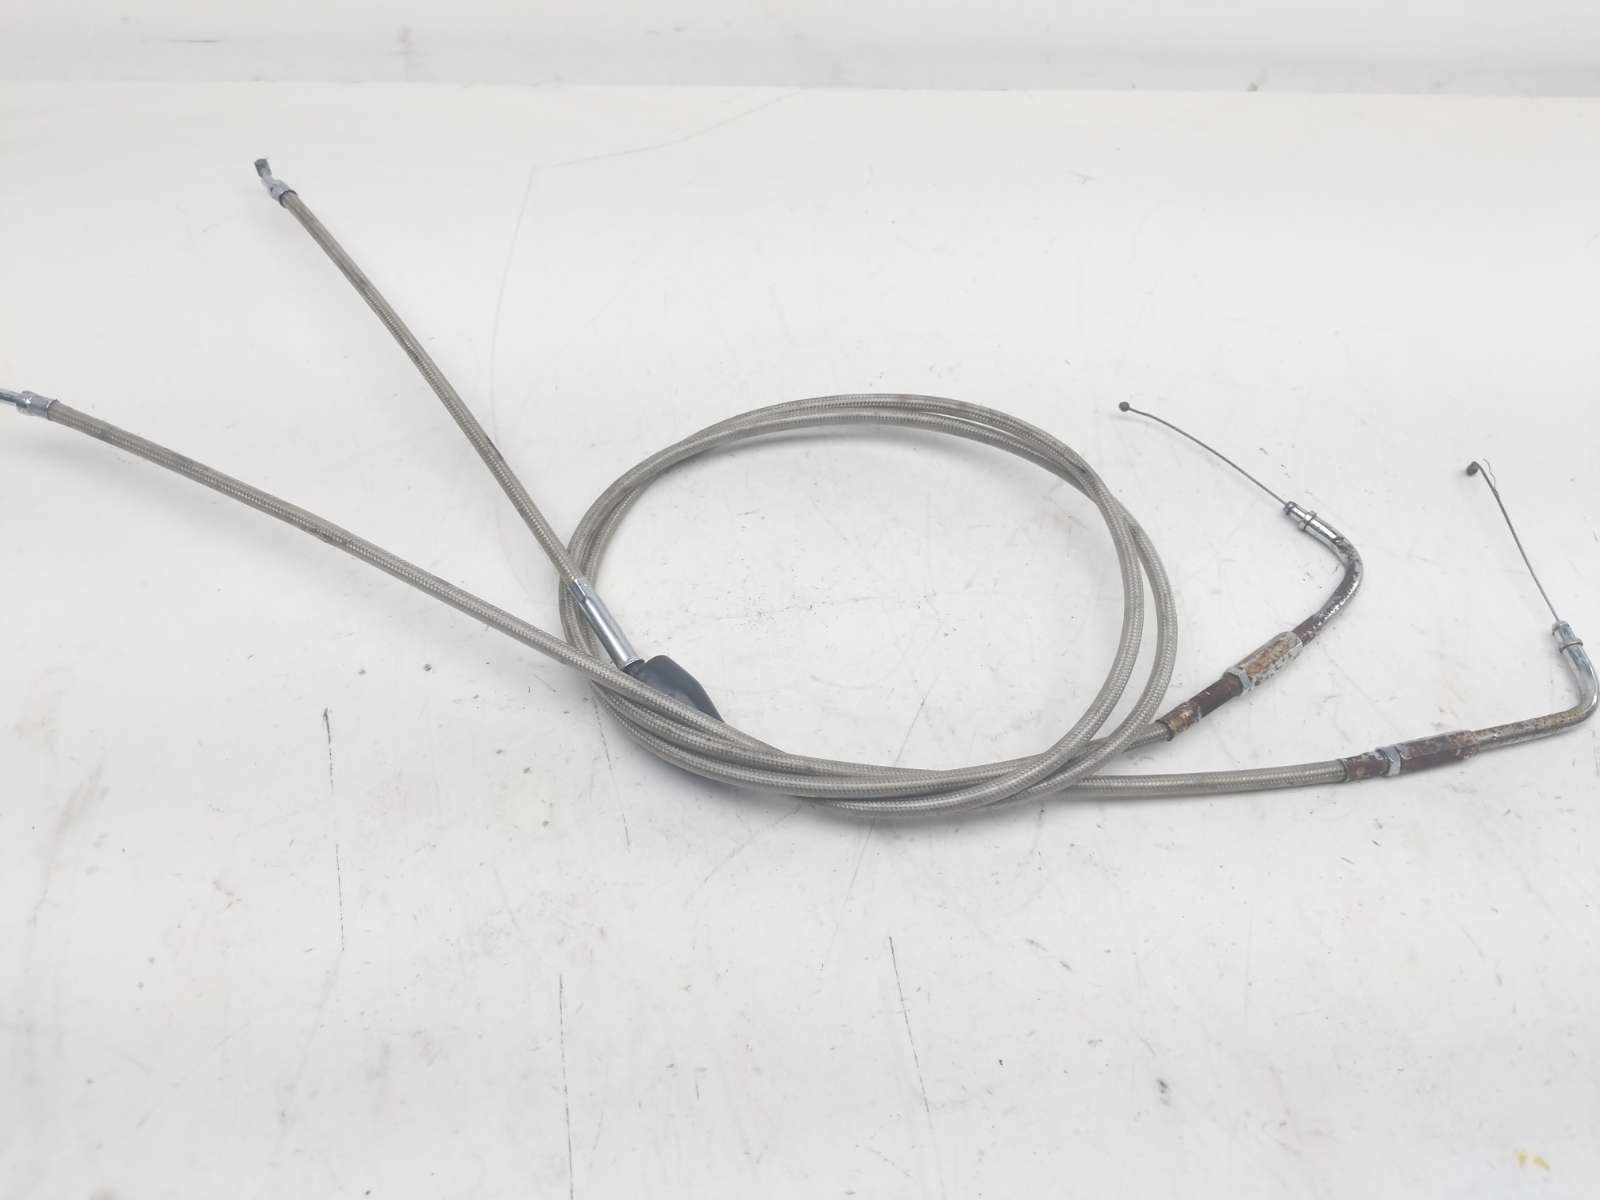 07 Harley Davidson FLHRCI Road King Classic Throttle Line Cable